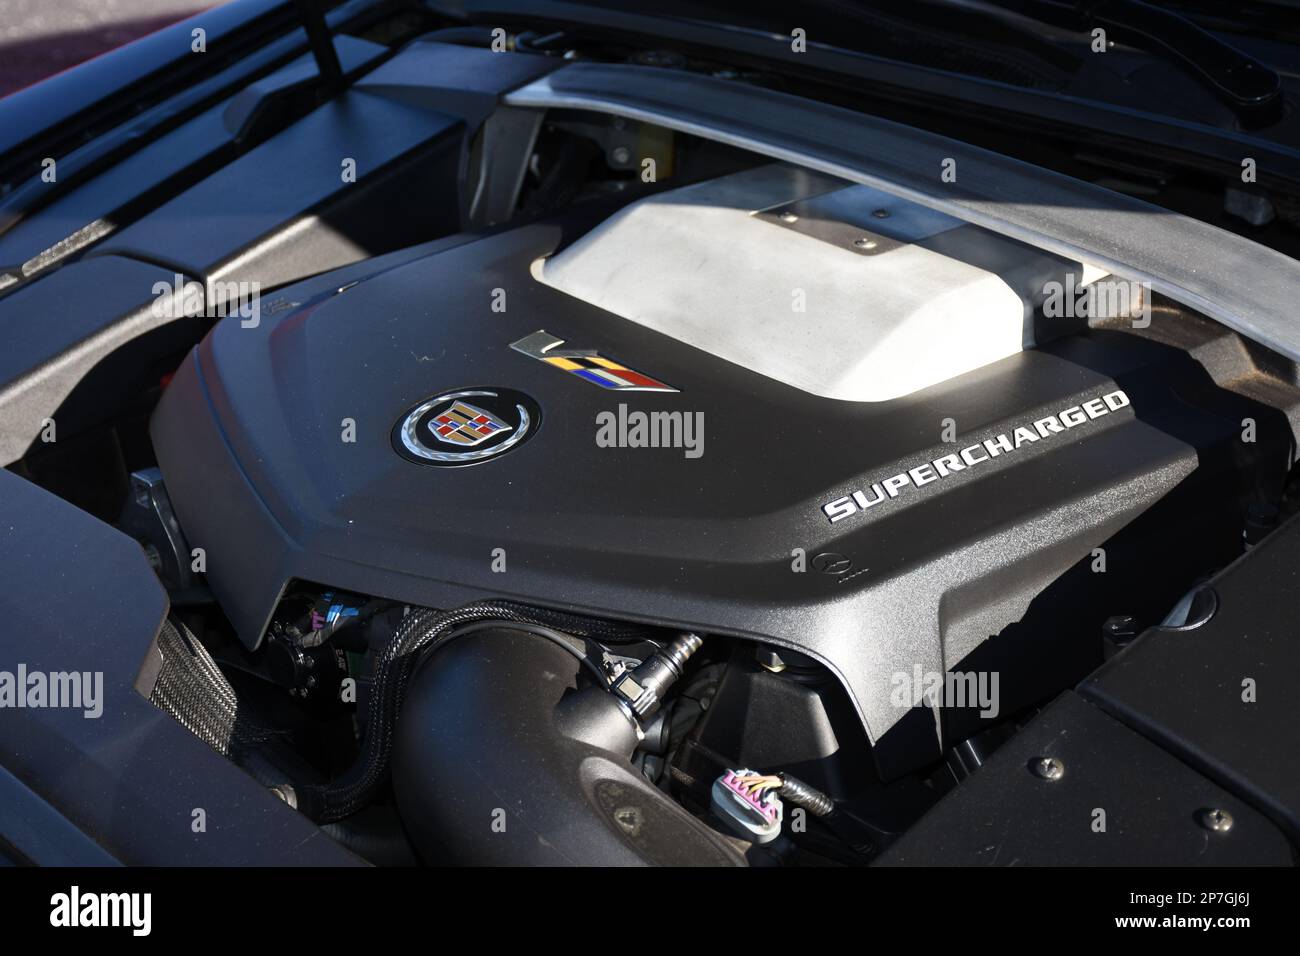 A LT4 Supercharged Engine in a Cadillac CTS V. Stock Photo